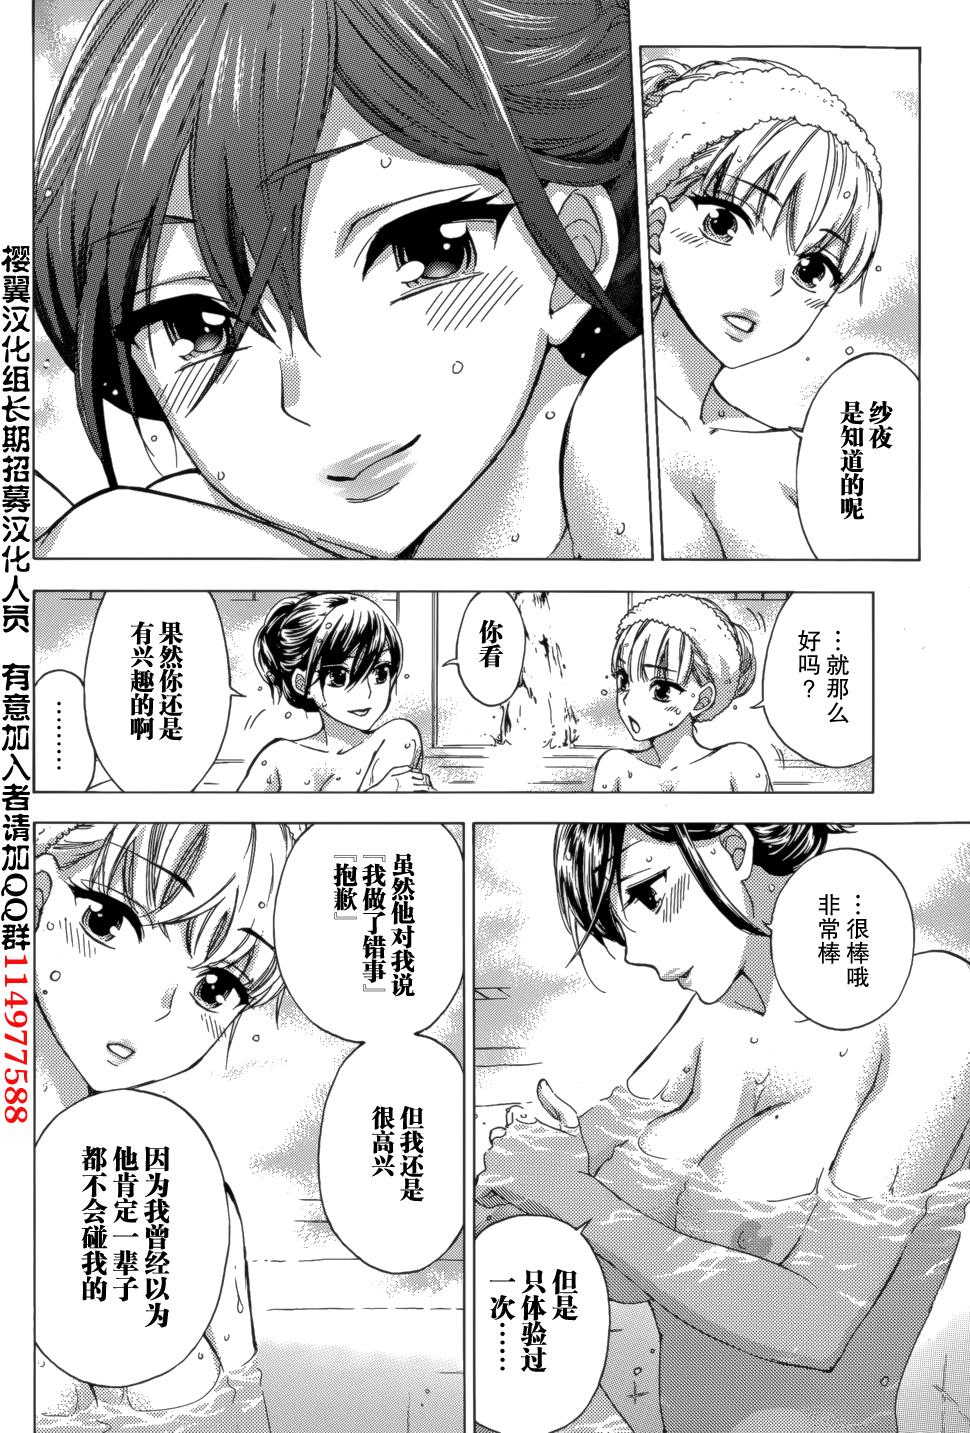 Exgf HUNDRED GAME Ch. 6 British - Page 2